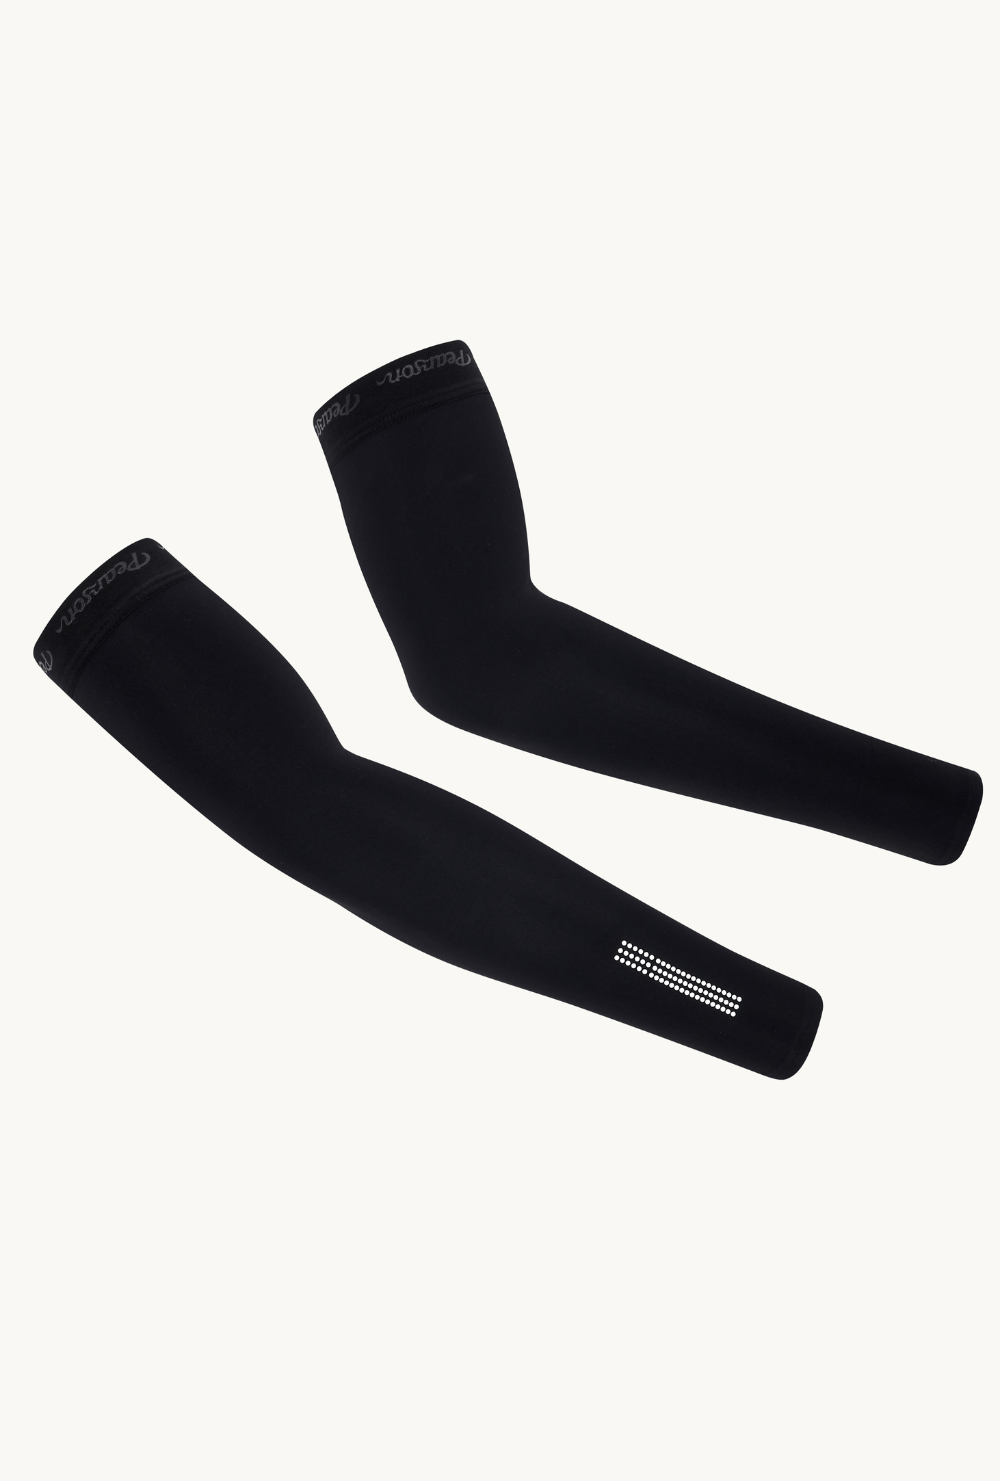 Pearson 1860  Call To Arms - Thermal Arm Warmers  Large / Black